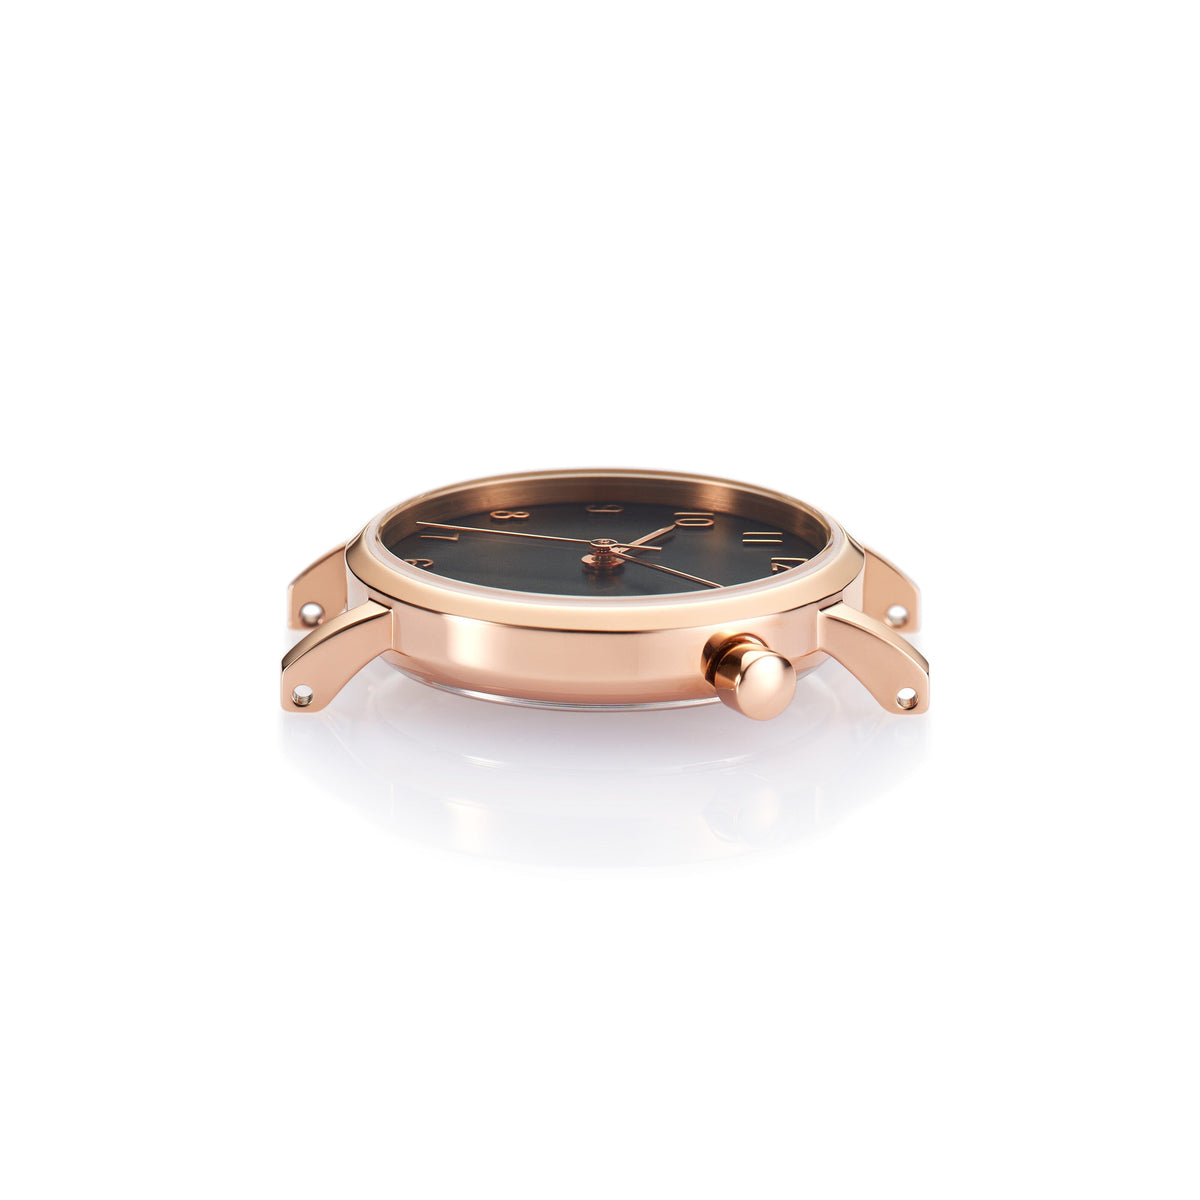 The Black and Rose Gold Watch -  Tigers (Kids)